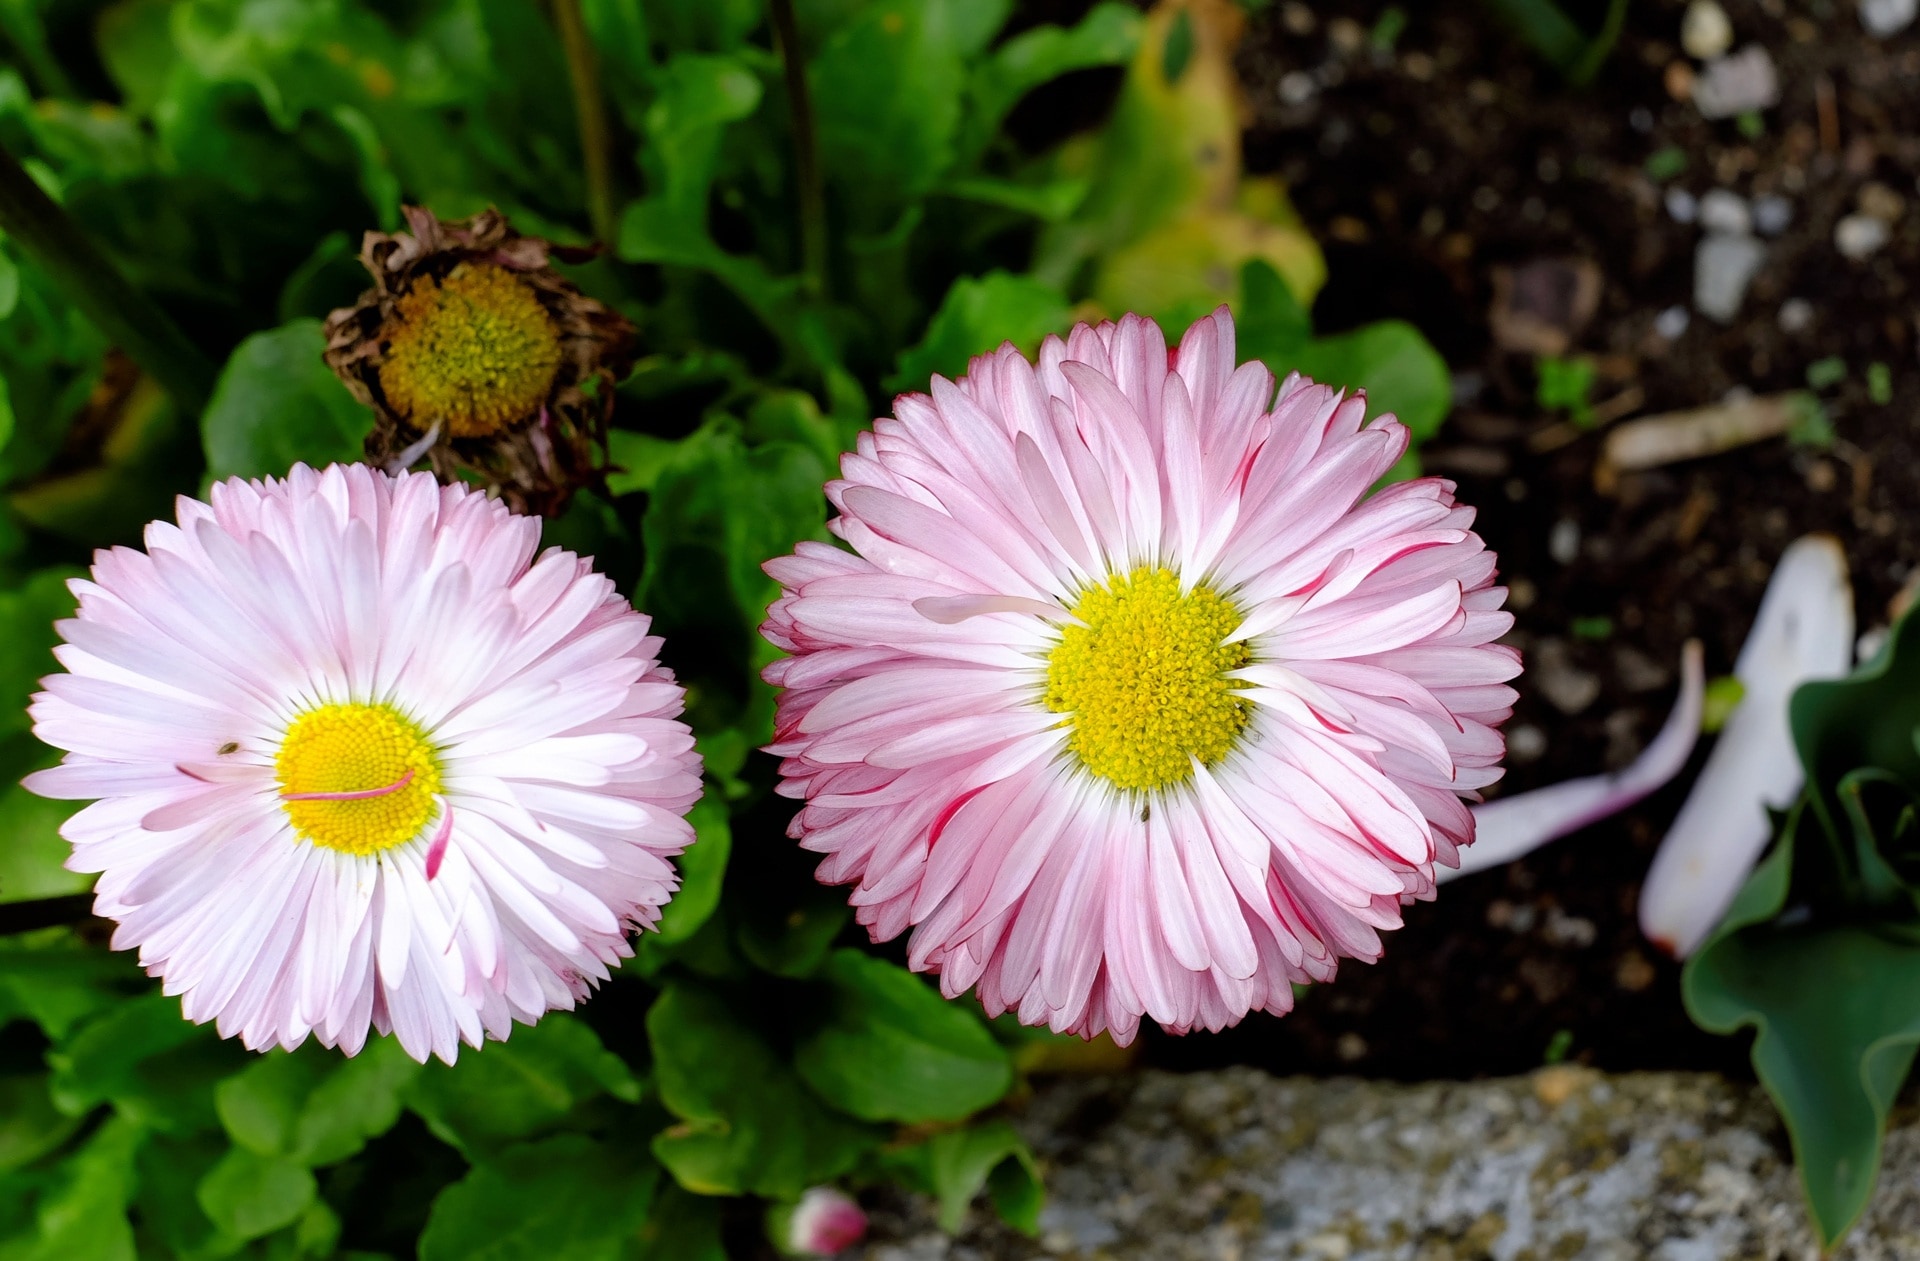 two pink and white petal flowers